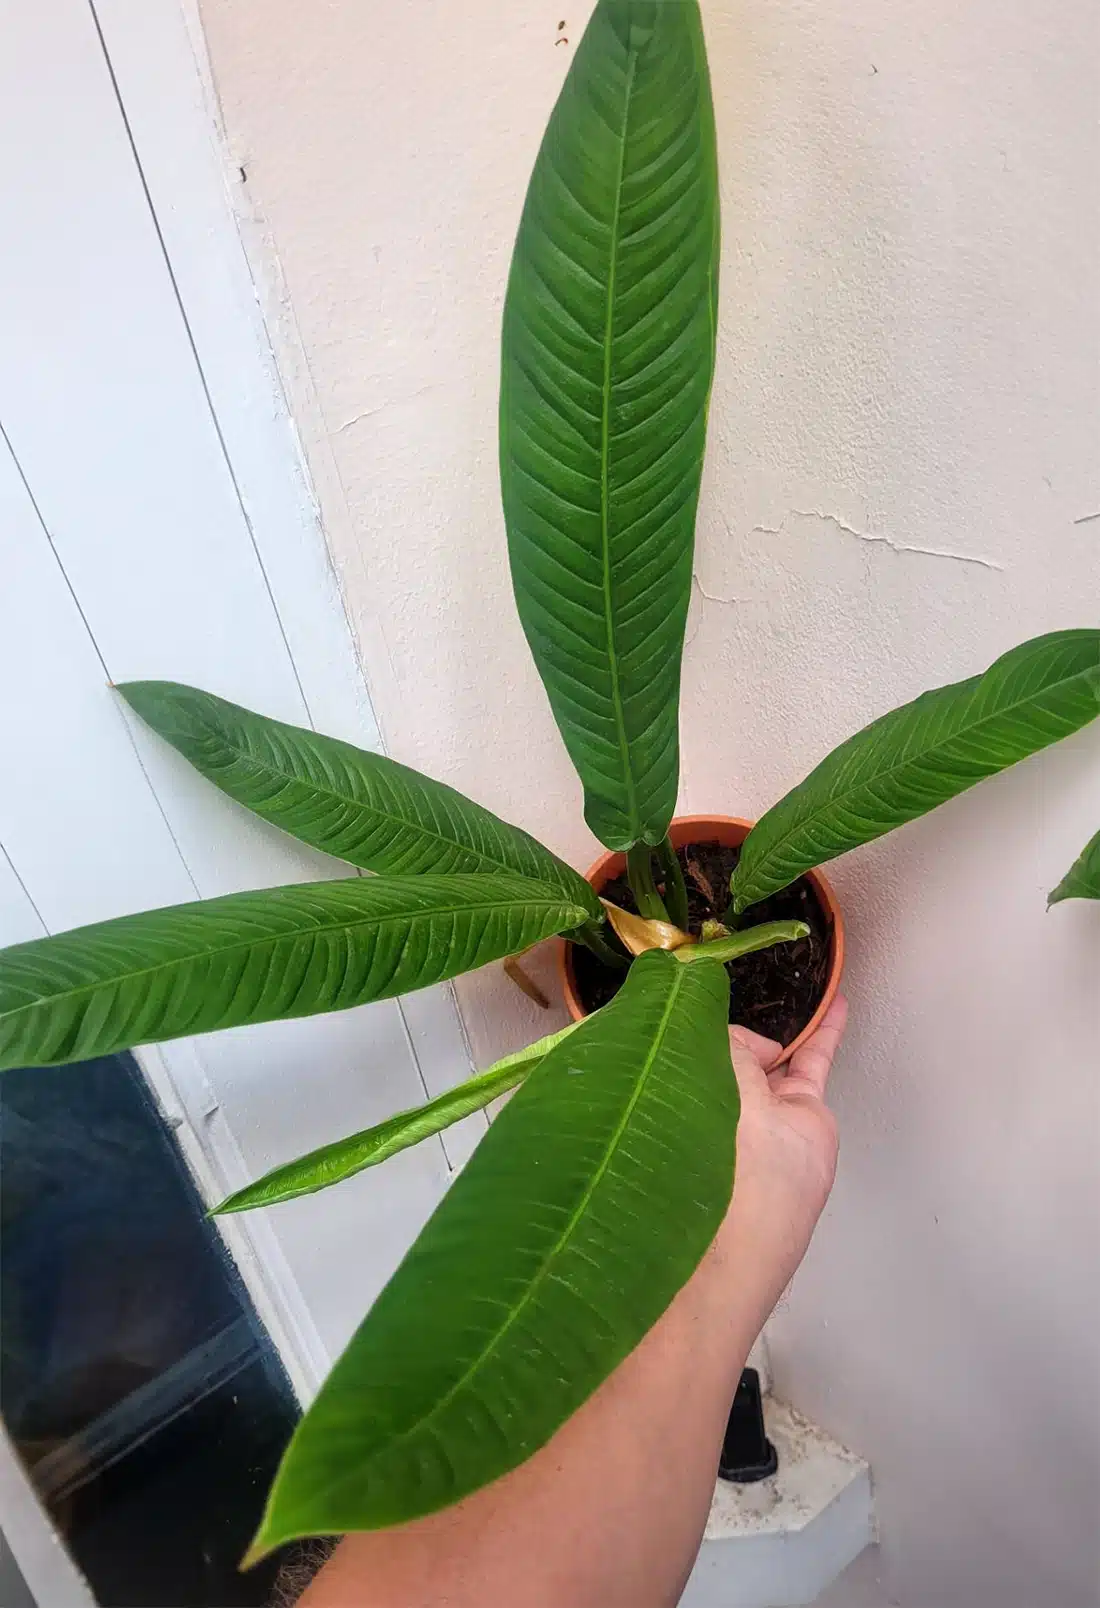 Philodendron campii for sale